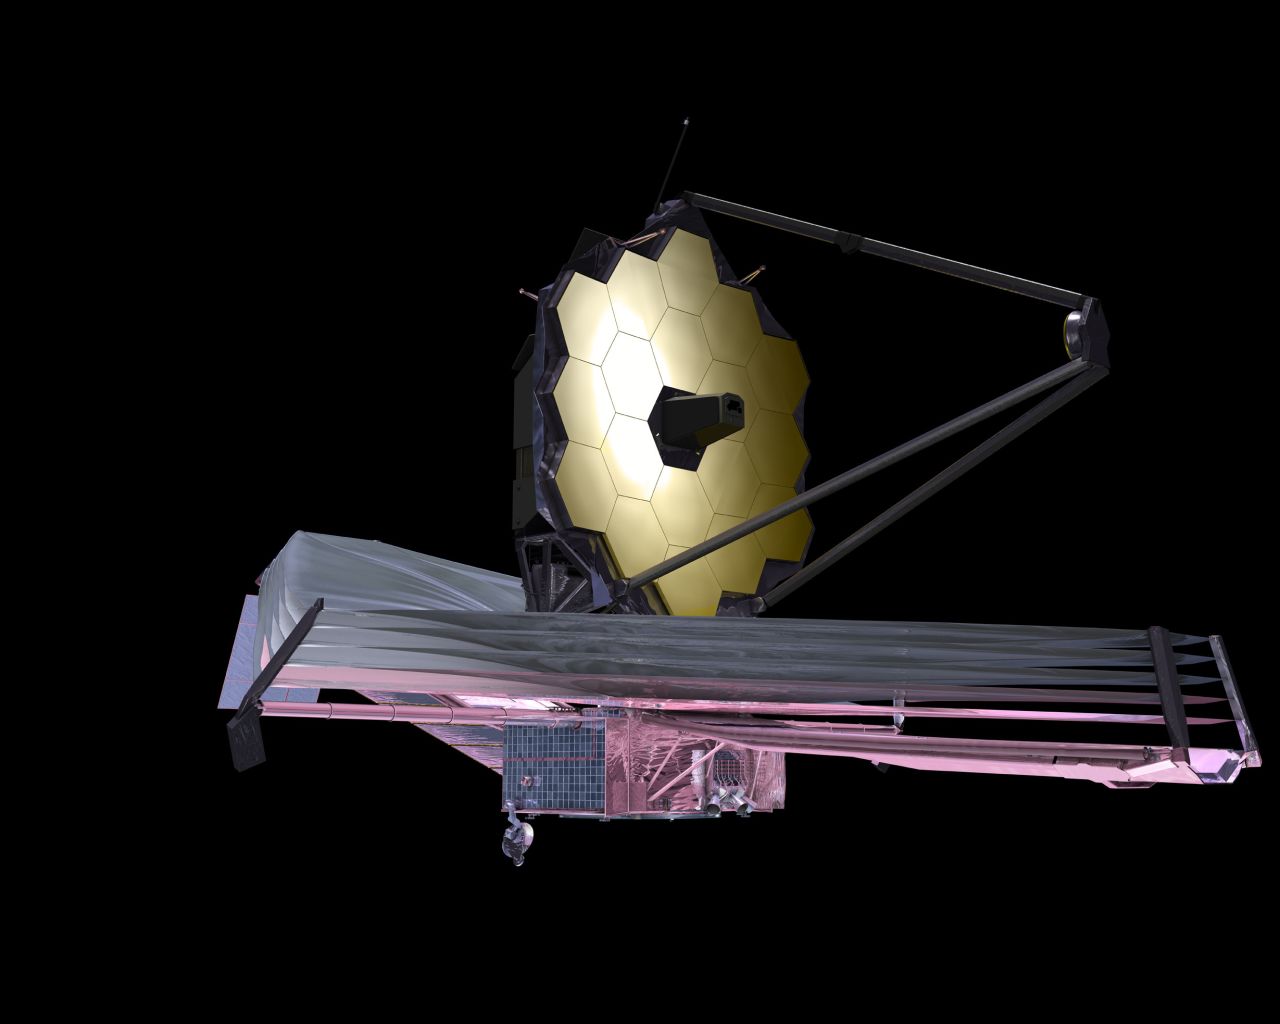 The James Webb Space Telescope, shown in this artist's depiction, would be even more powerful than the Hubble Space Telescope, and may enhance our understanding of enigmatic substances called dark matter and dark energy. 